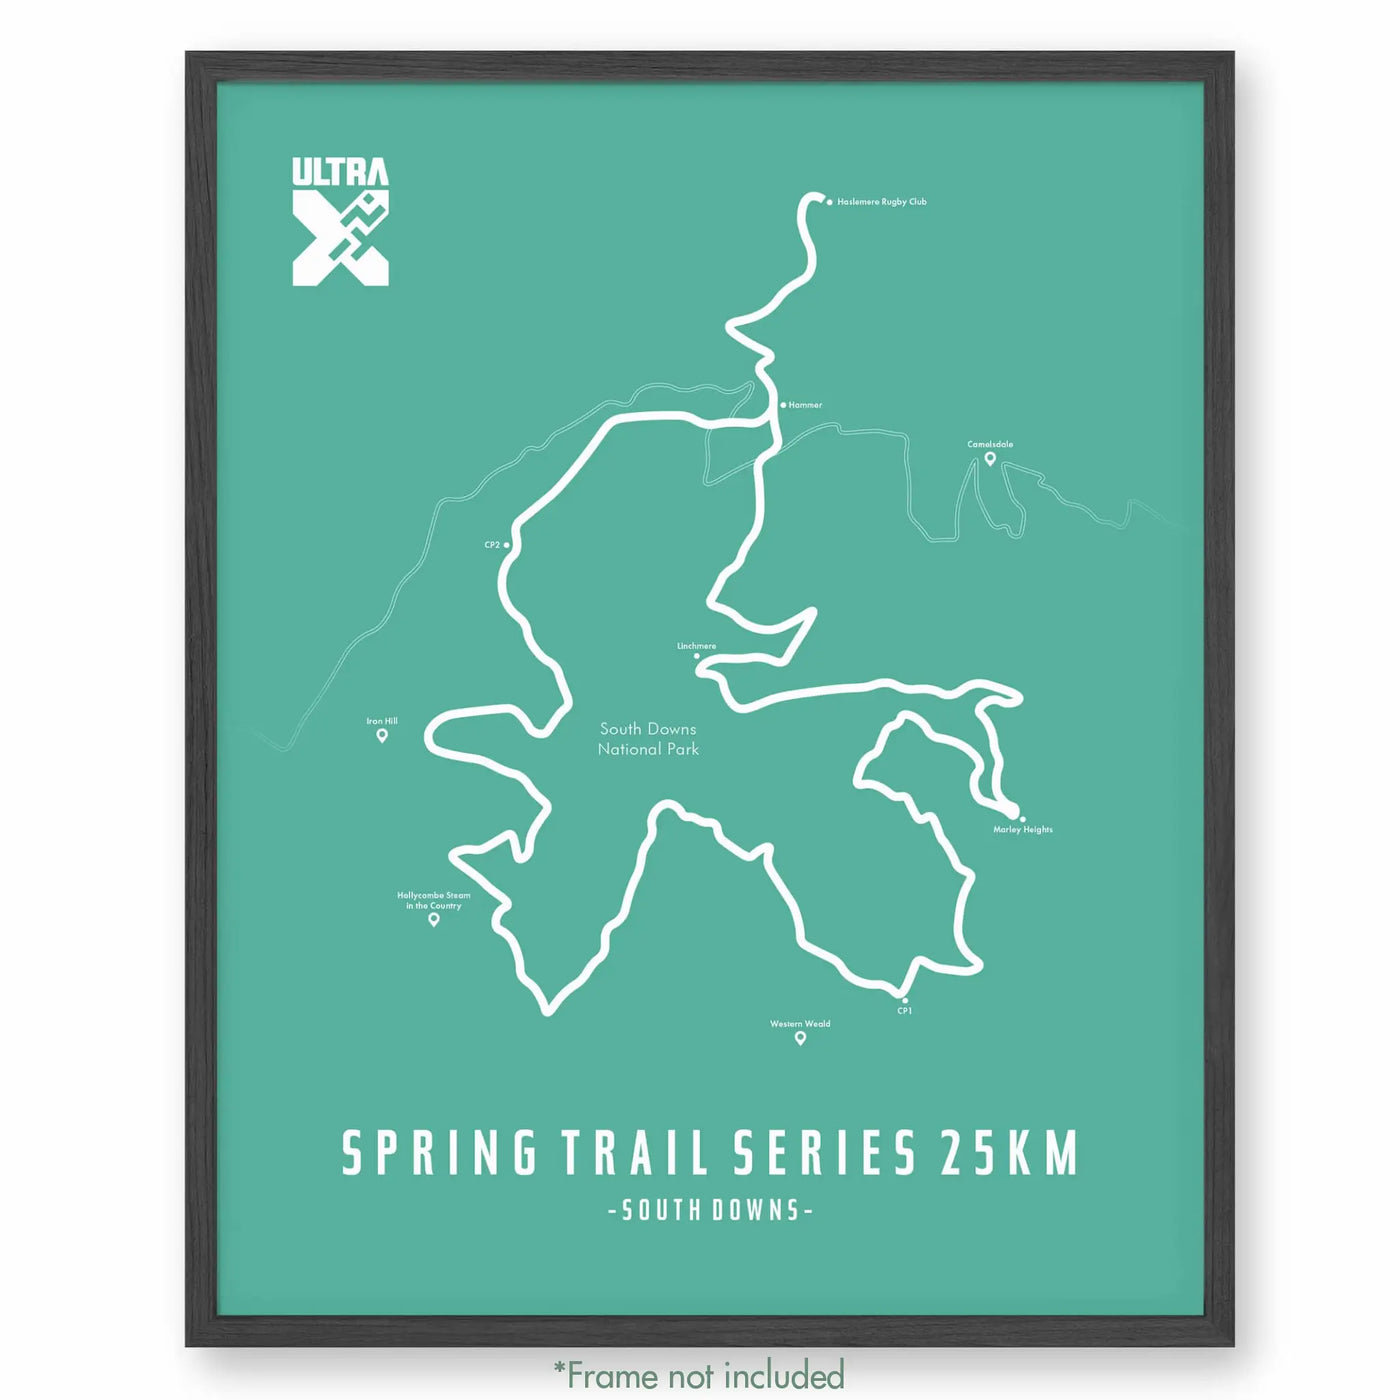 Trail Poster of Ultra X Spring Trail Series 25km - Teal